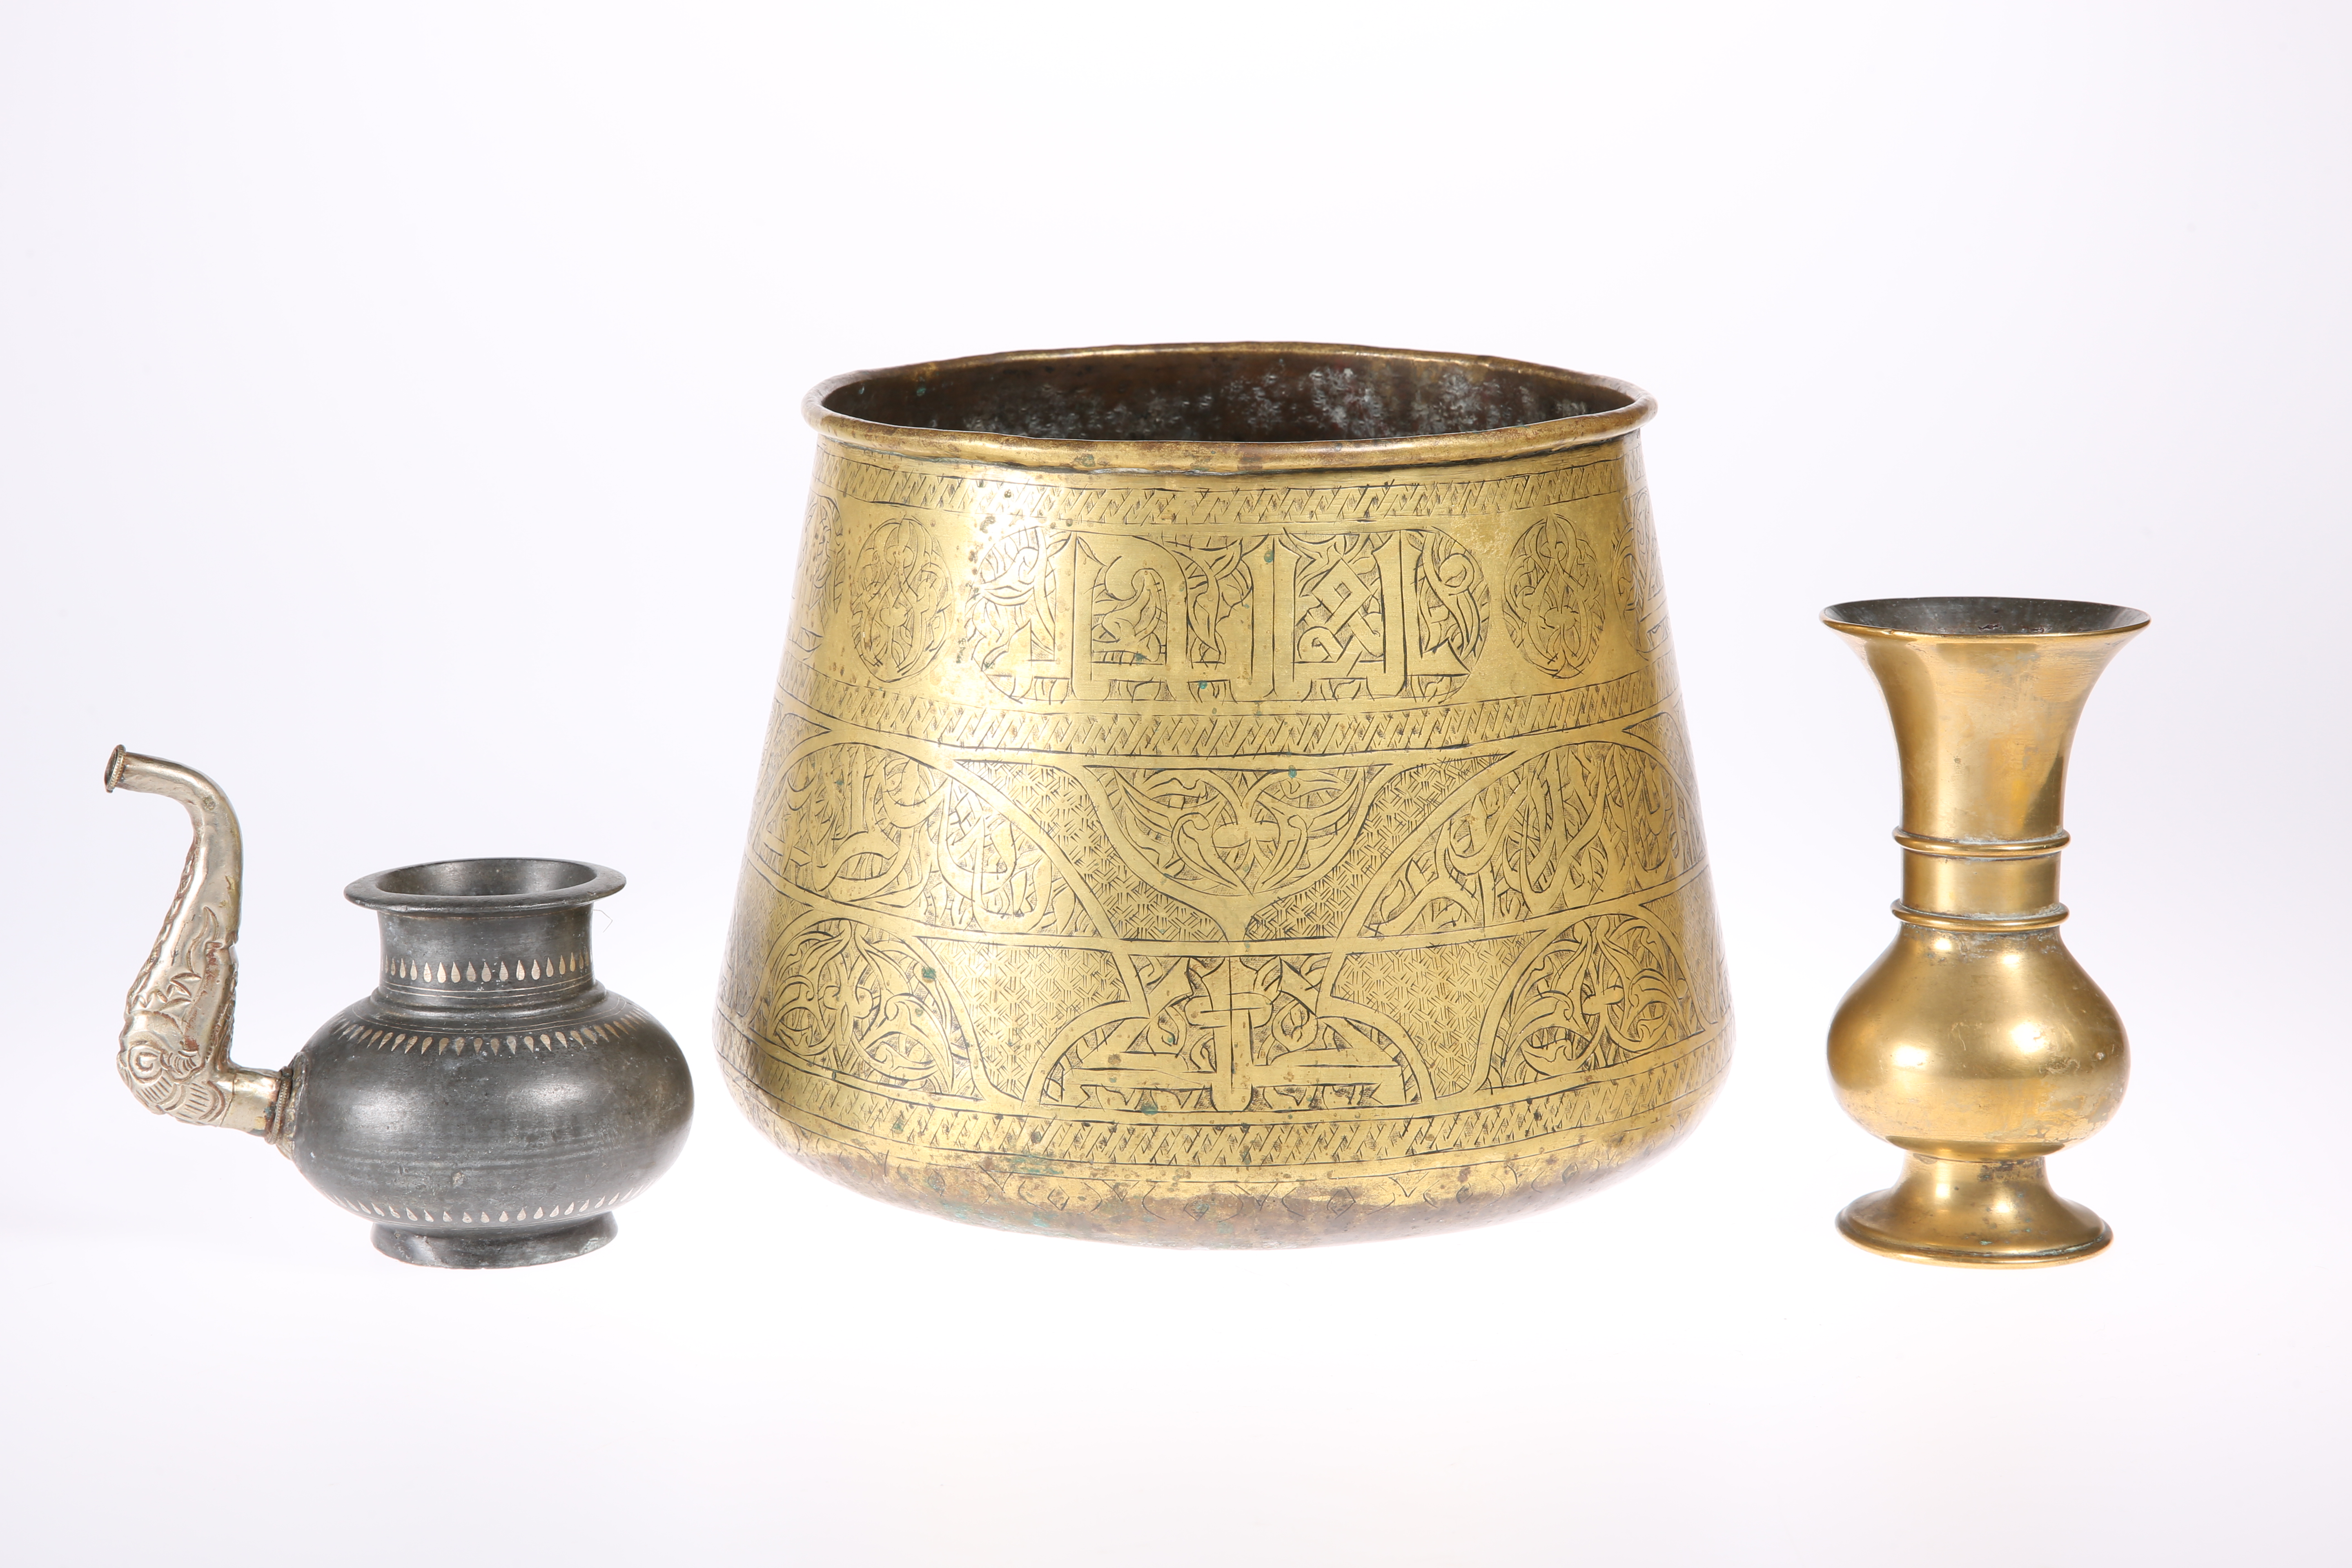 A LARGE ISLAMIC BRONZE BOWL, decorated with script; together with two other Islamic items, A POT